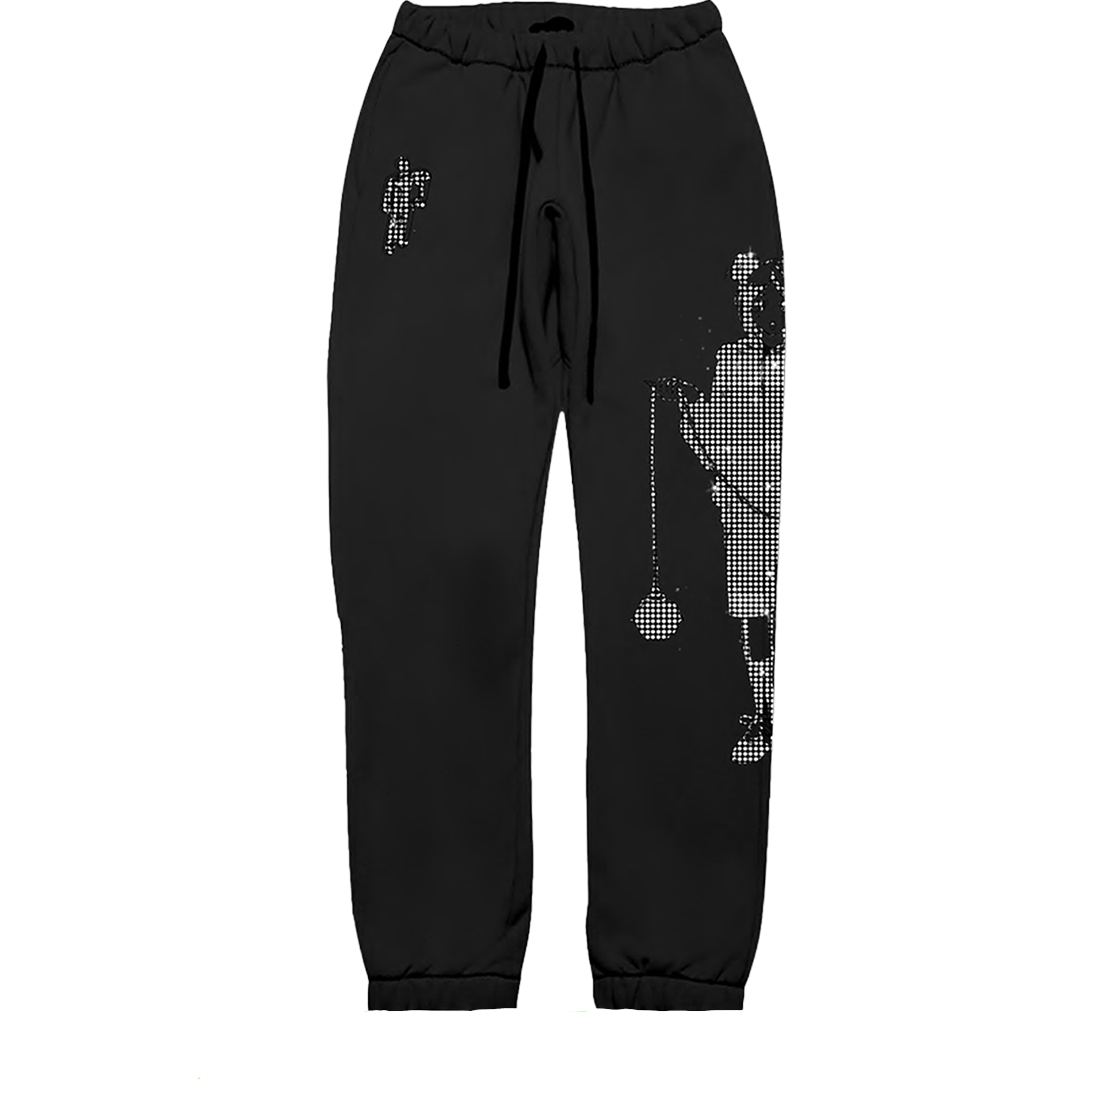 Rhinestone Beam Foot Joggers Cotton Pants For Men And Women Fashionable Sweatpants  Joggers In Sizes S XL 1816 From Ivmig, $38.99